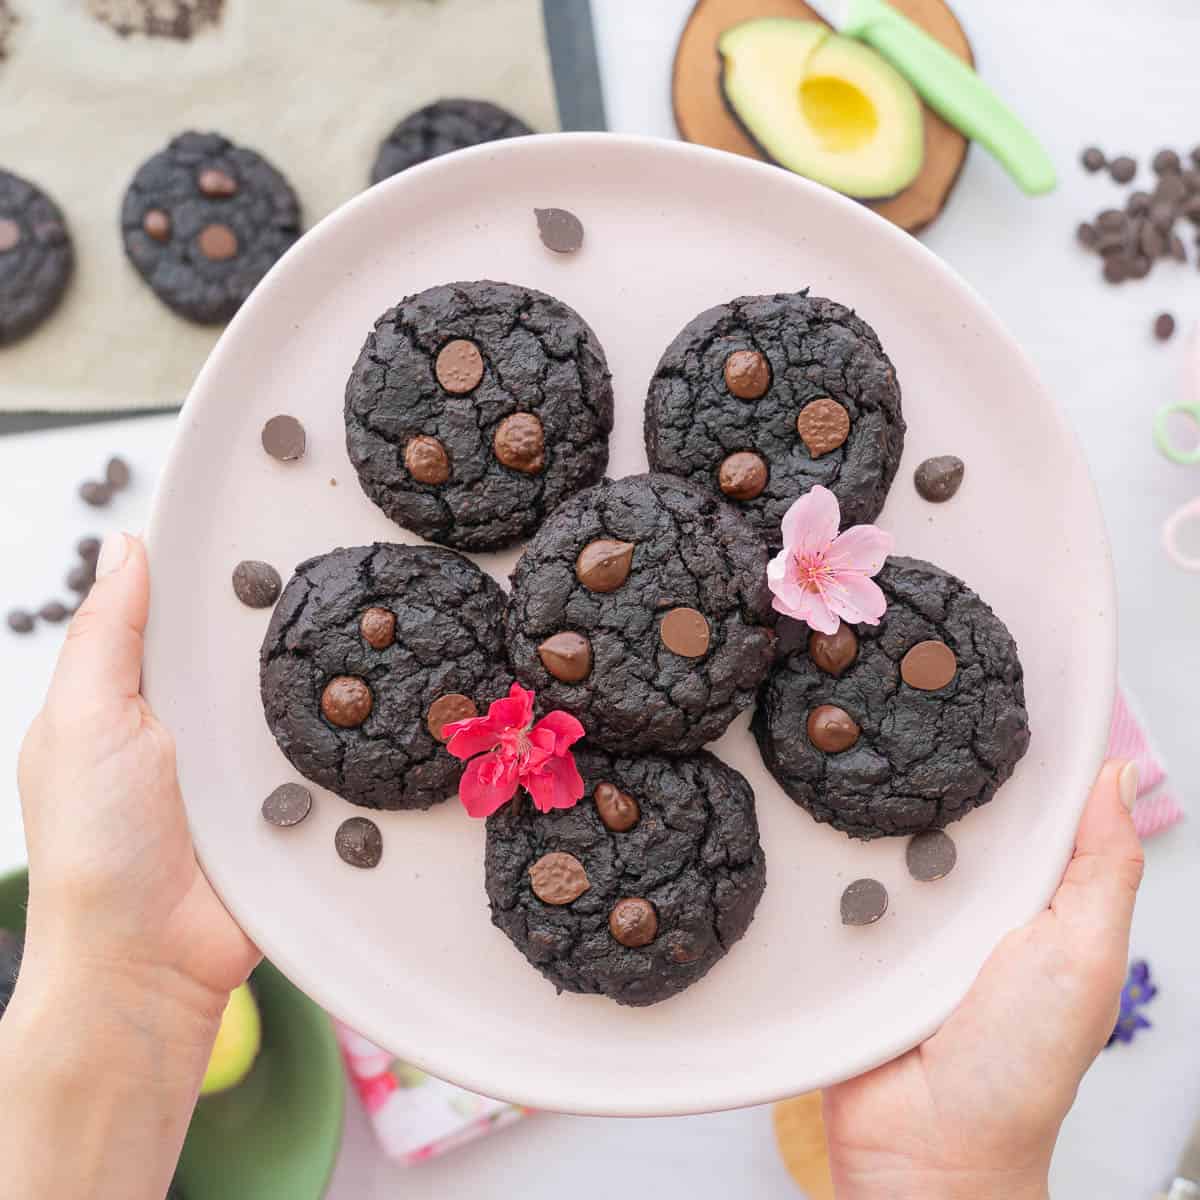 Six chocolate cookies on a pale pink plate scattered with edible flowers.